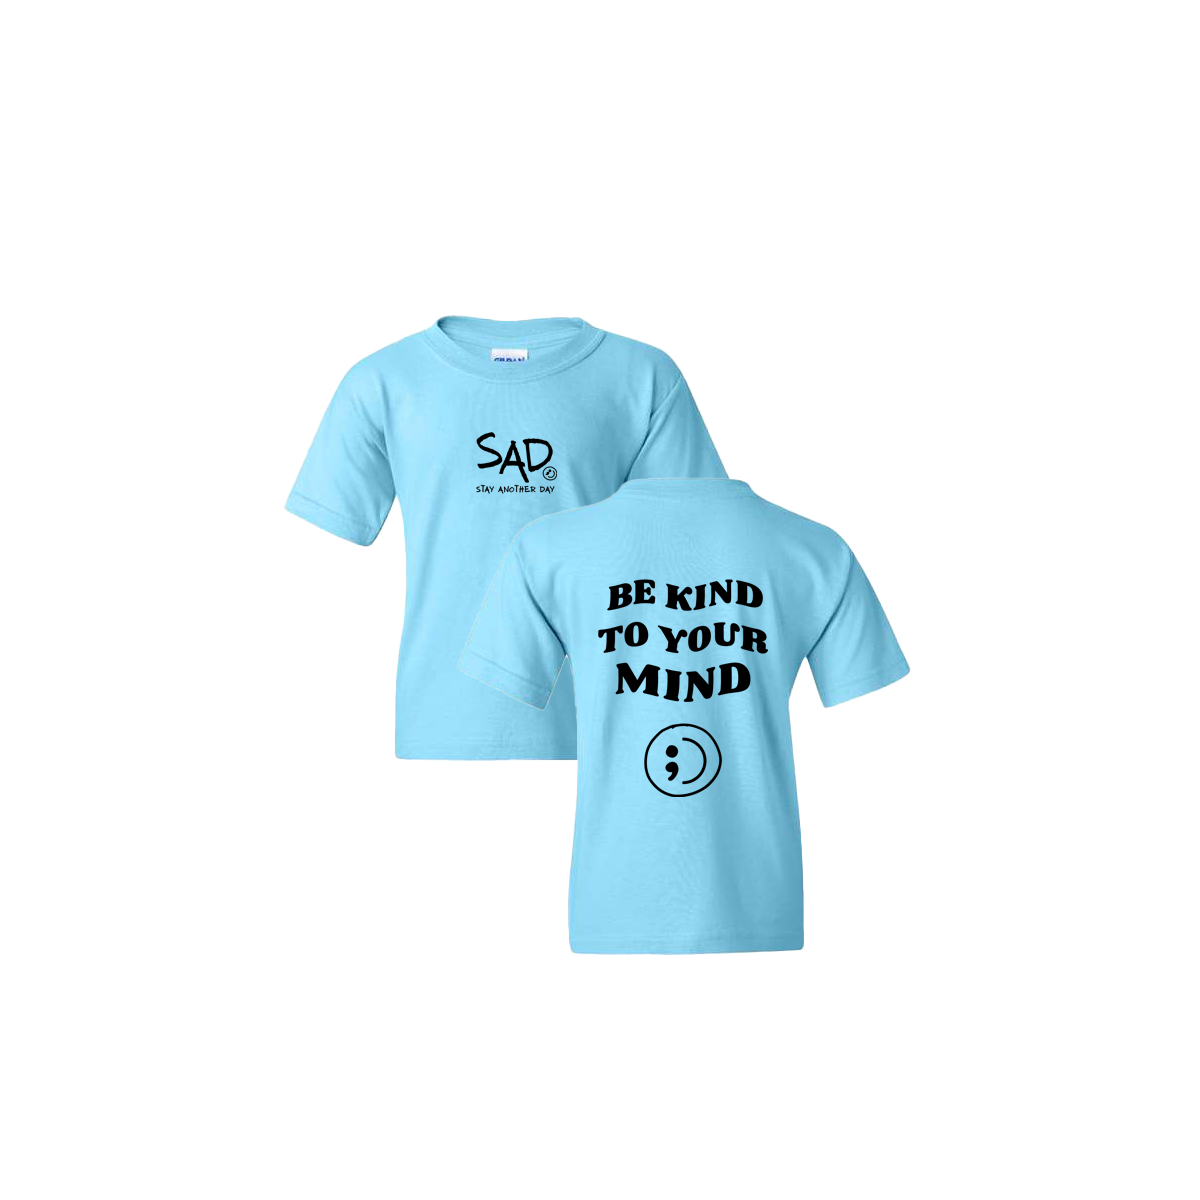 Be Kind To Your Mind Screen Printed Sky Blue Youth Tshirt